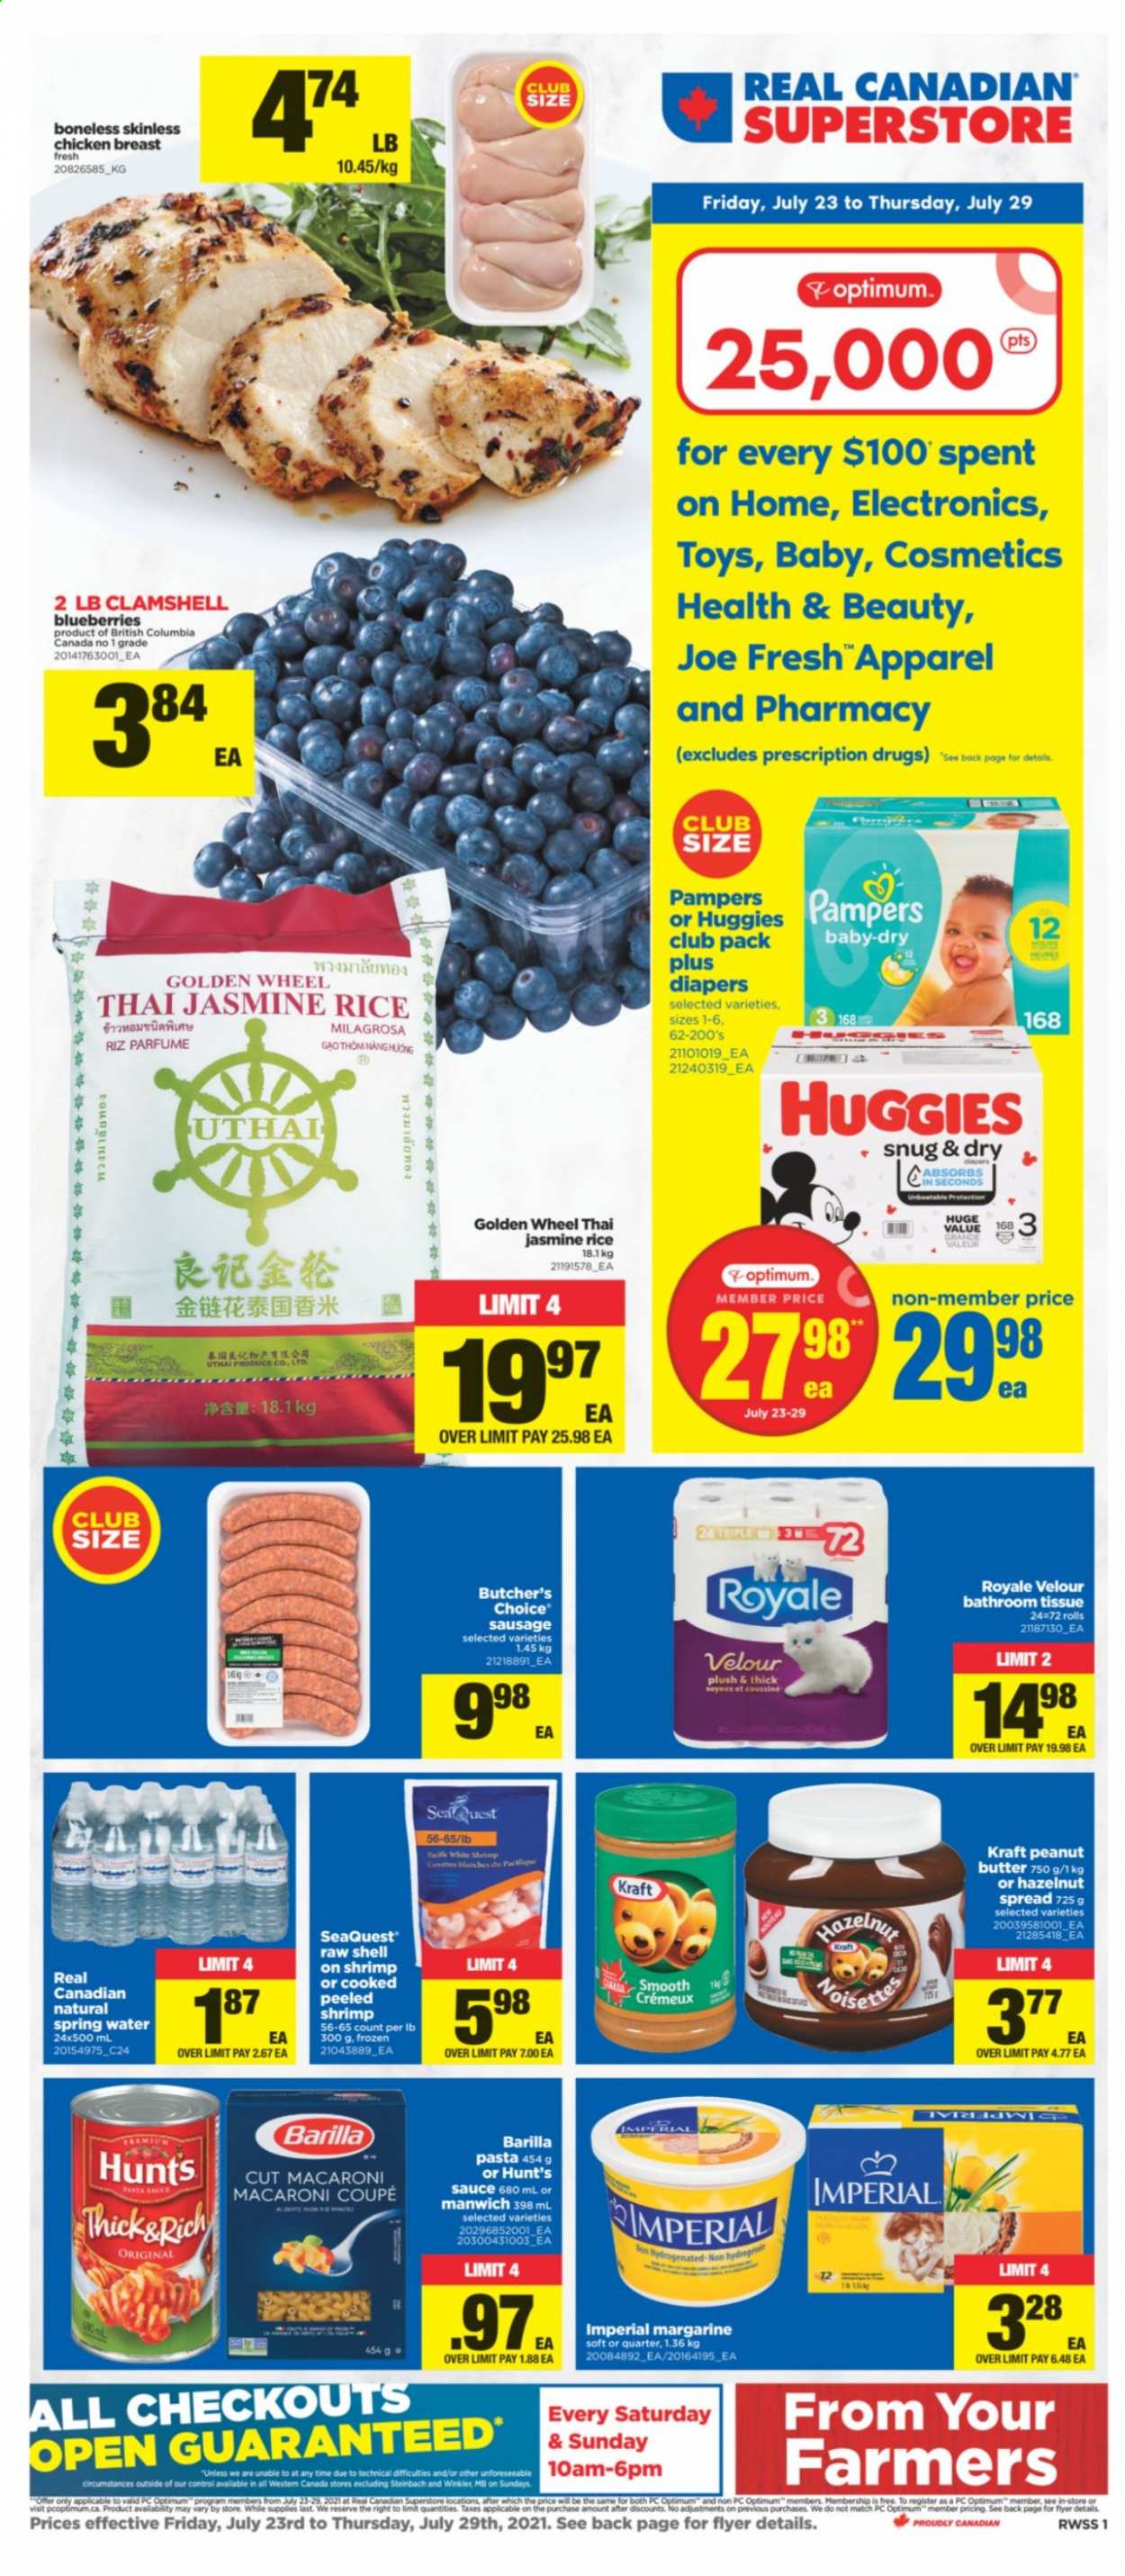 thumbnail - Real Canadian Superstore Flyer - July 23, 2021 - July 29, 2021 - Sales products - blueberries, macaroni, pasta, sauce, Barilla, Kraft®, sausage, margarine, Manwich, rice, jasmine rice, peanut butter, hazelnut spread, spring water, chicken breasts, chicken, nappies, bath tissue, Optimum, toys, Huggies, Pampers. Page 1.